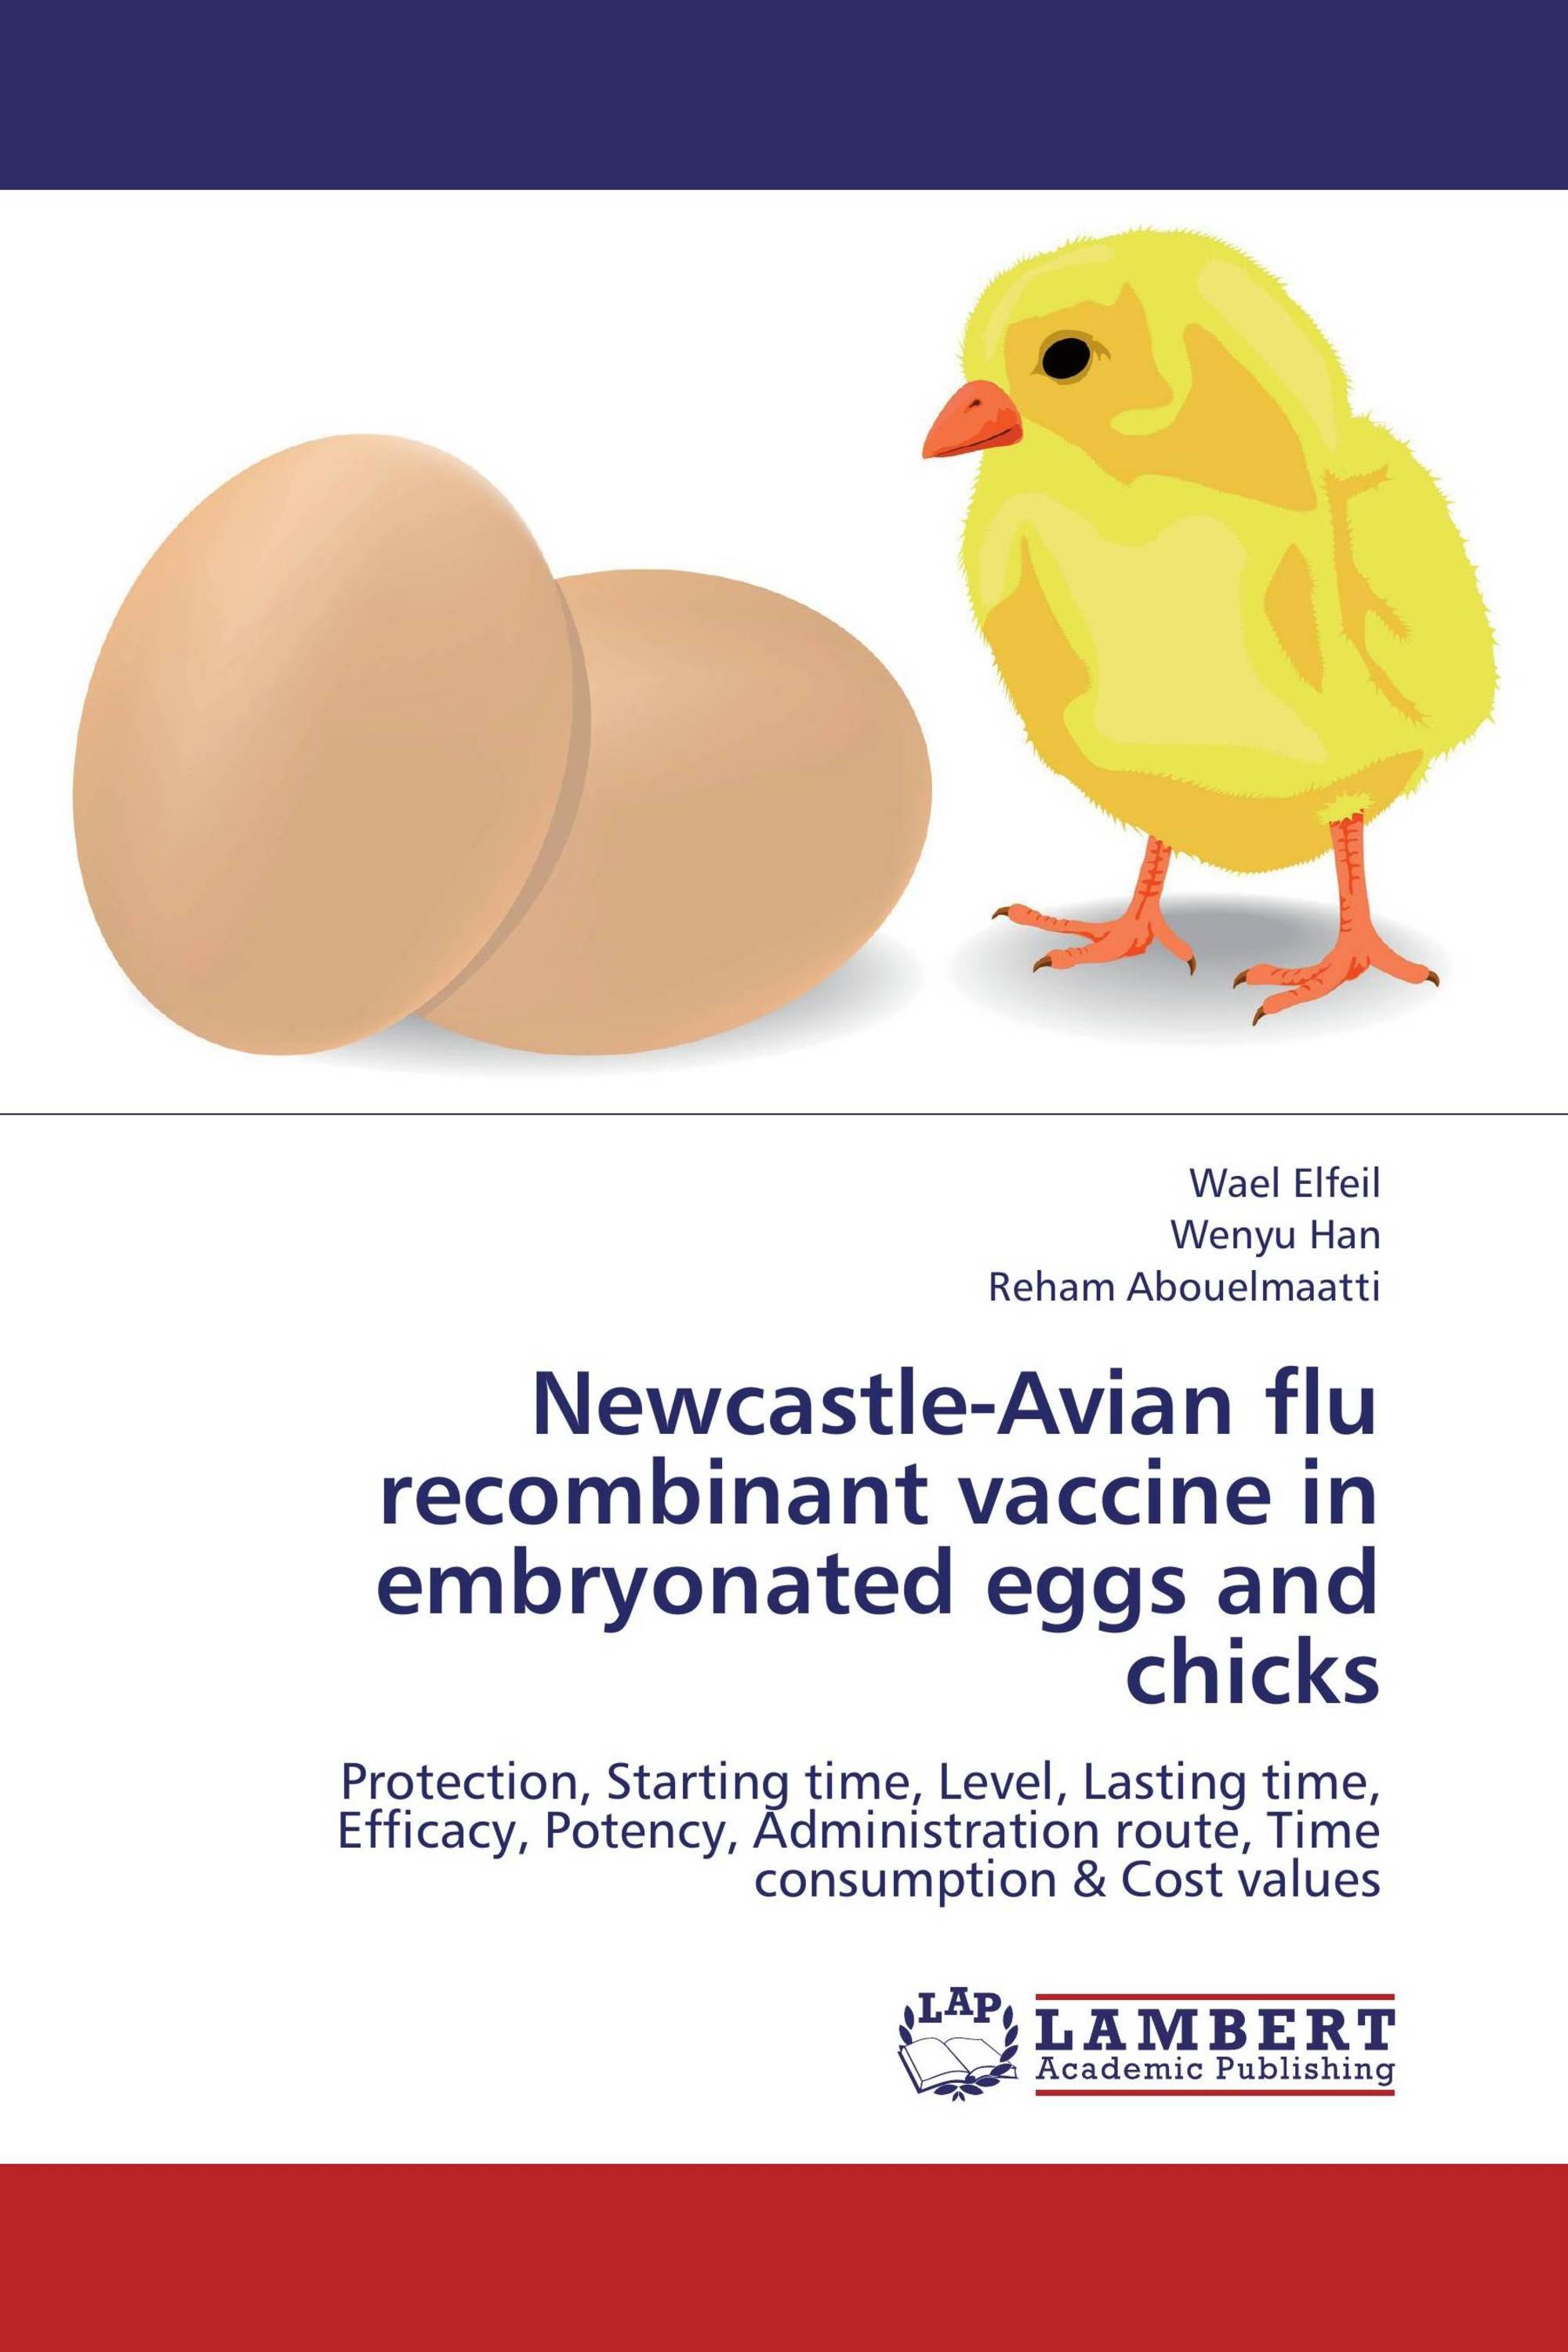 NewcastleAvian flu vaccine in embryonated eggs and chicks